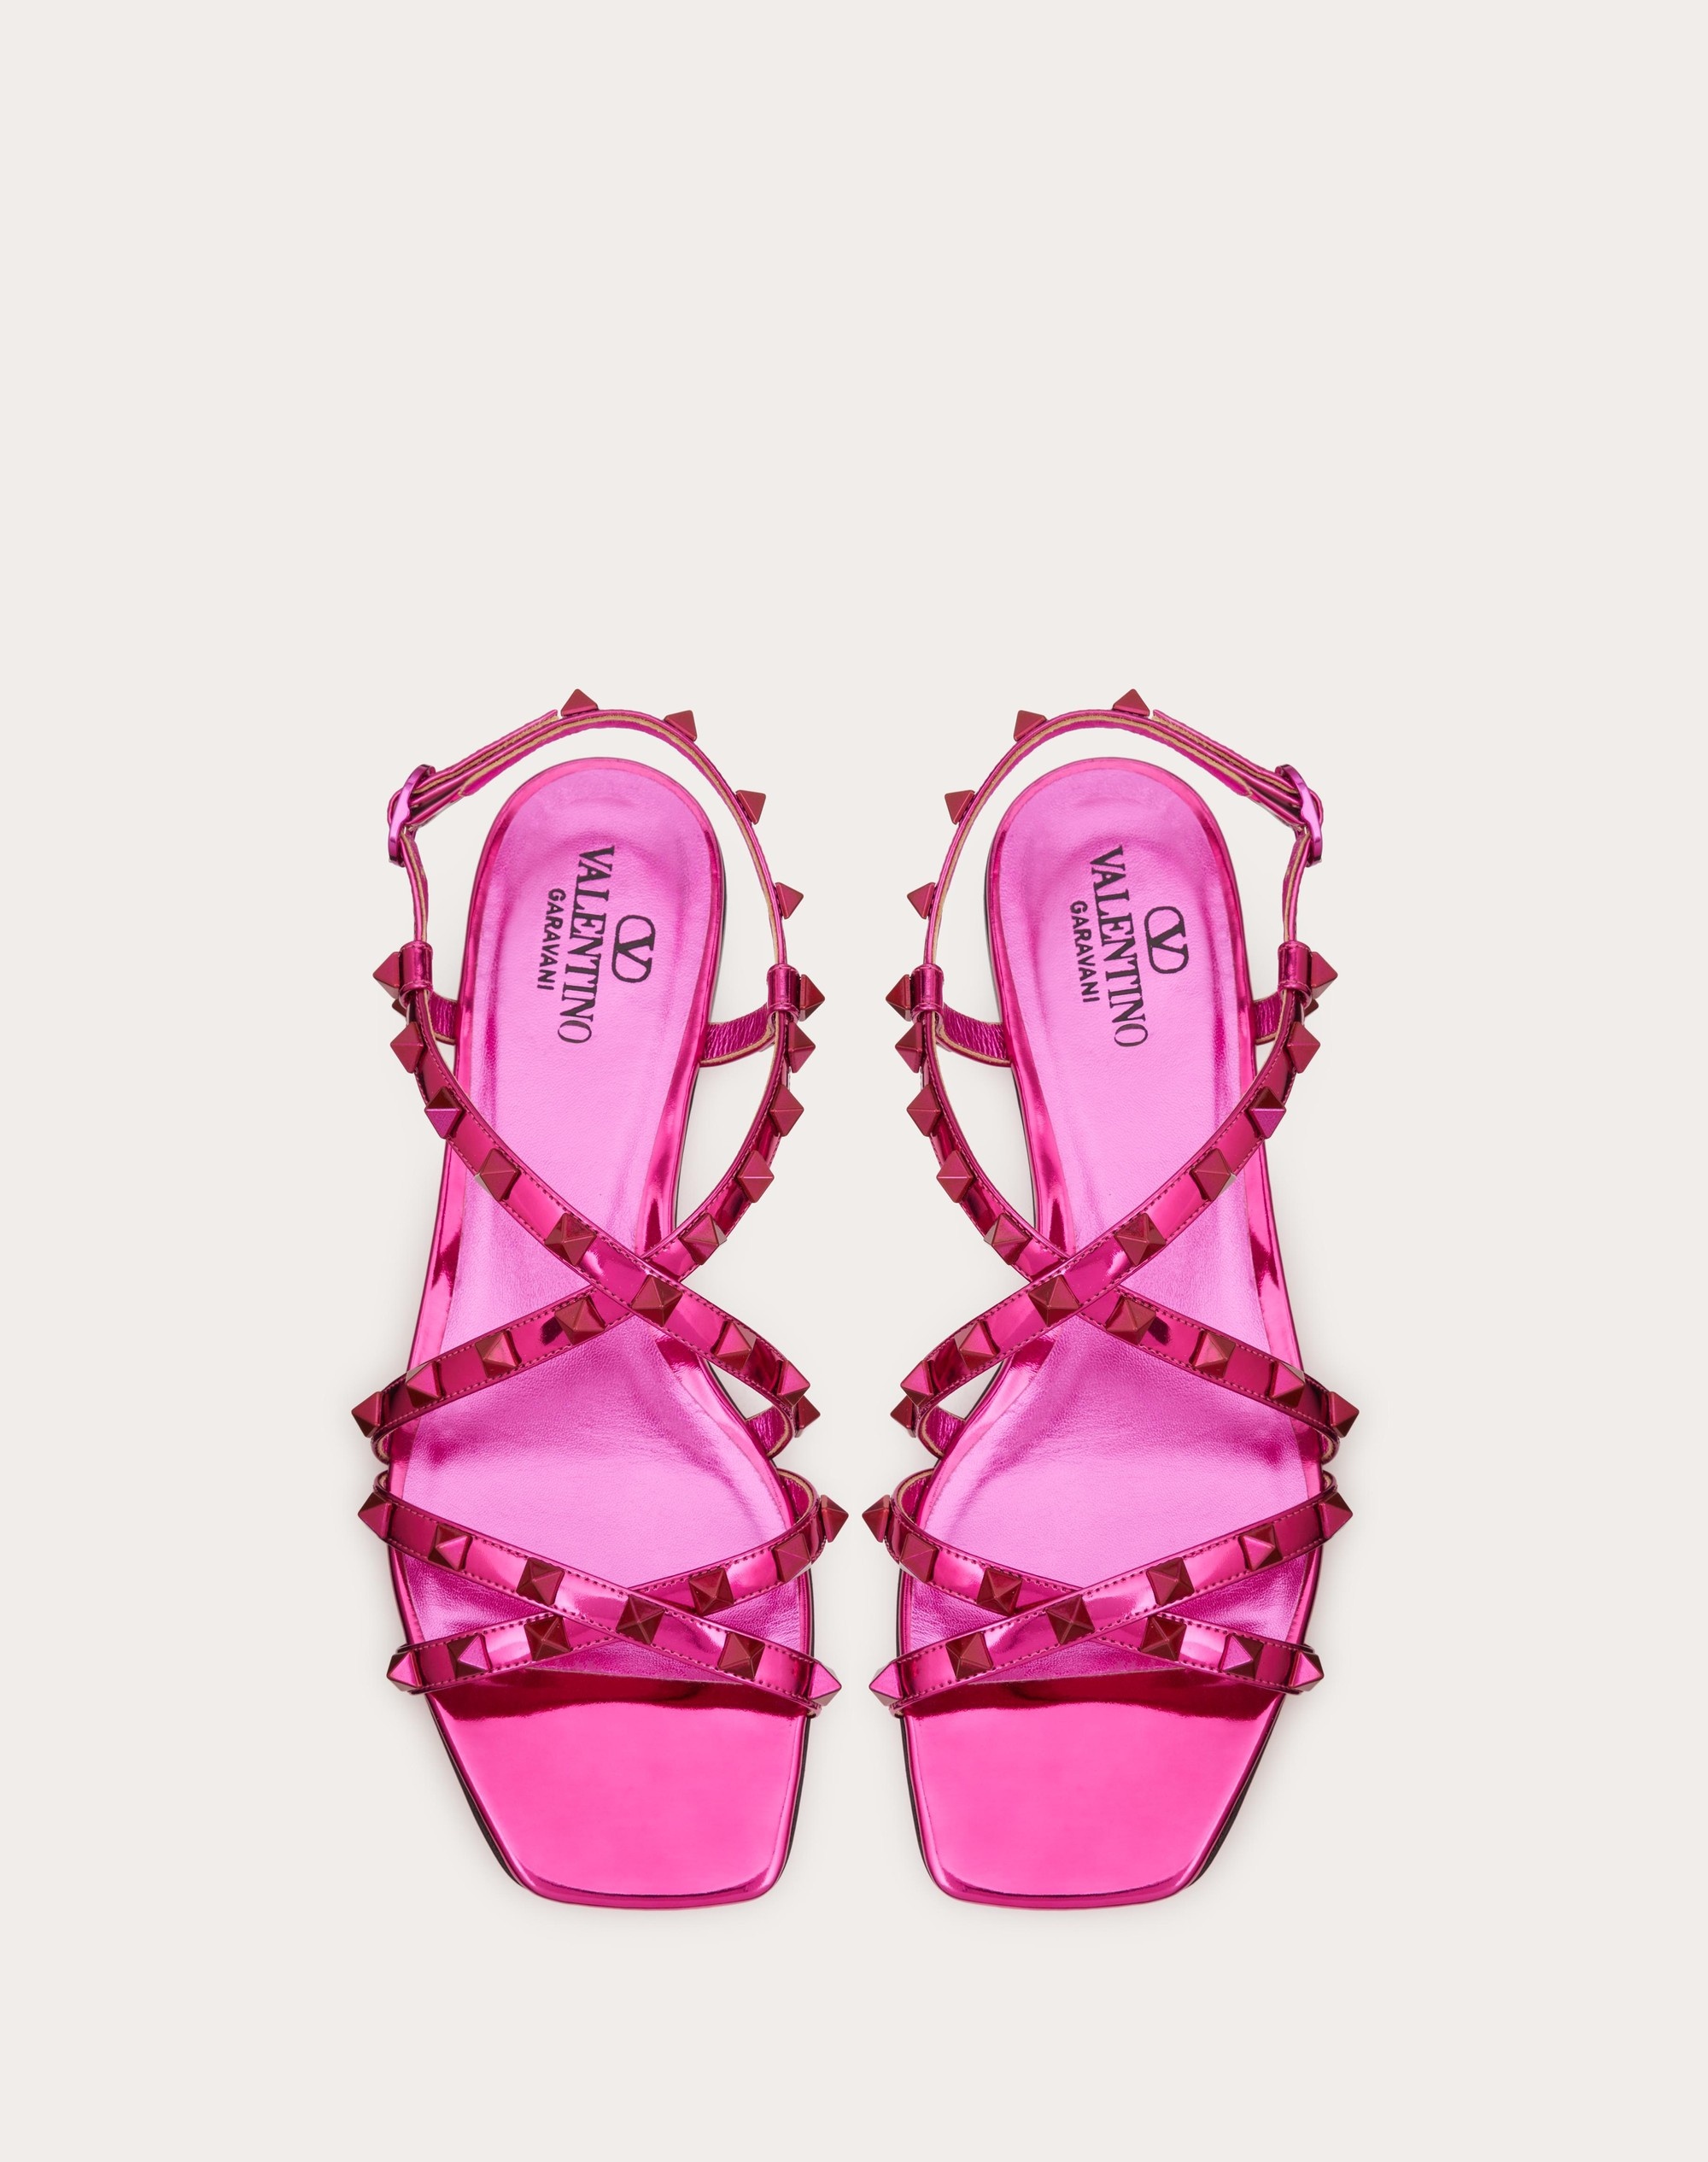 ROCKSTUD MIRROR-EFFECT SANDAL WITH MATCHING STUDS AND STRAPS - 4